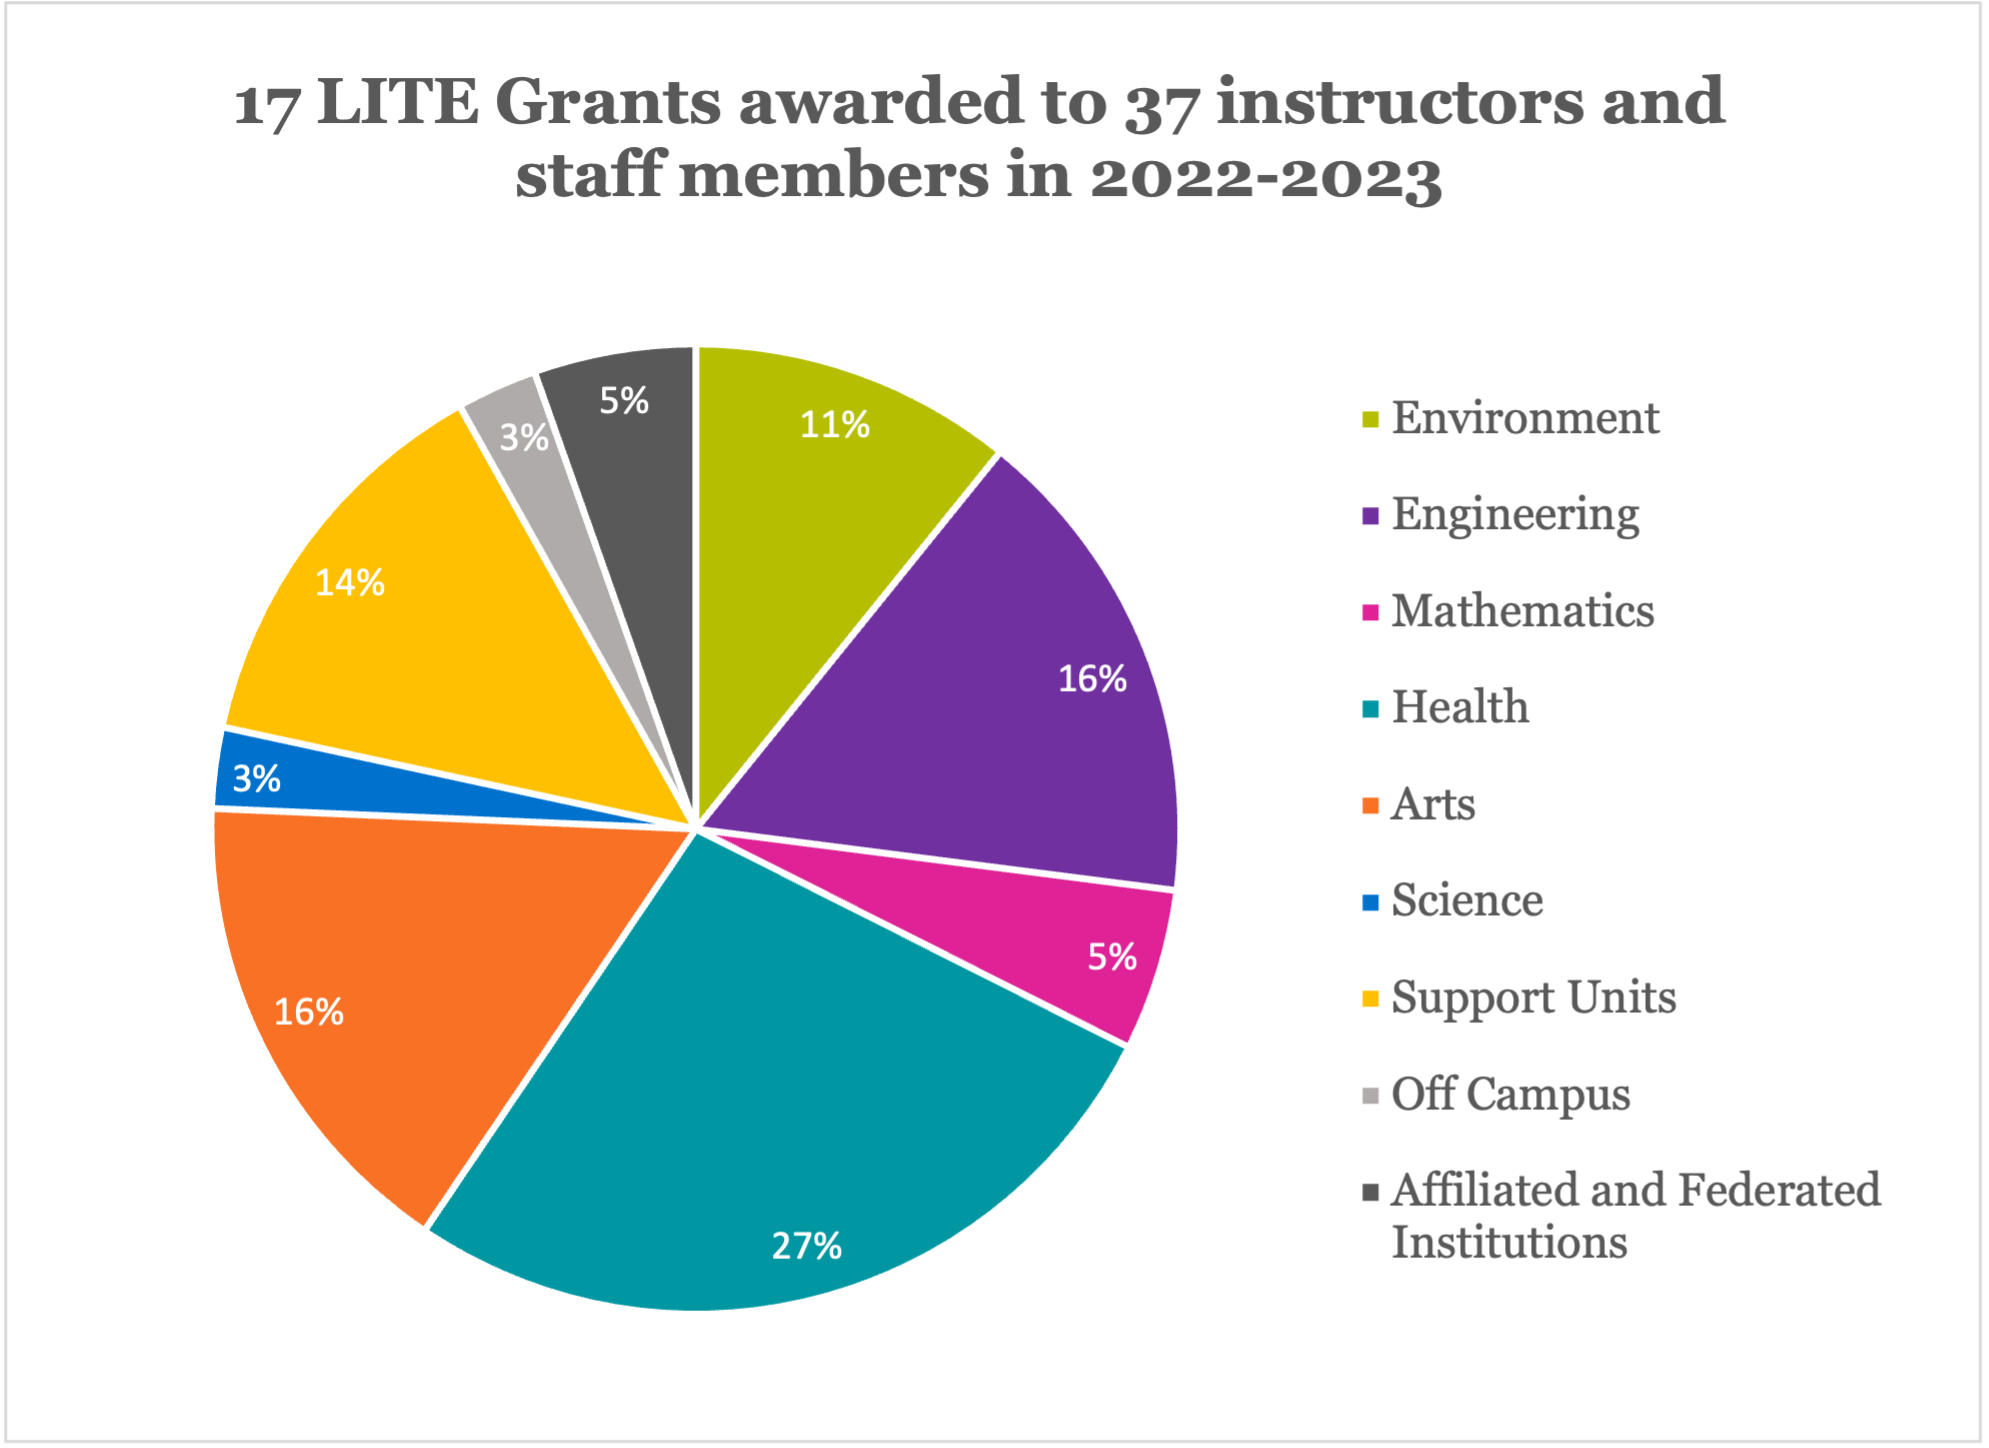 Figure 6. Pie chart showing 17 LITE Grants awarded to 37 instructors and staff members in 2022-2023. Listed in a circular format, 11% of the grants were to the Faculty of Environment, 16% to Engineering, 5% to Mathematics, 27% to Health, 16% to Arts, 3% to Science, 14% to Support Units, 3% to Off-Campus participants and 5% to the Affiliated and Federated Institutions